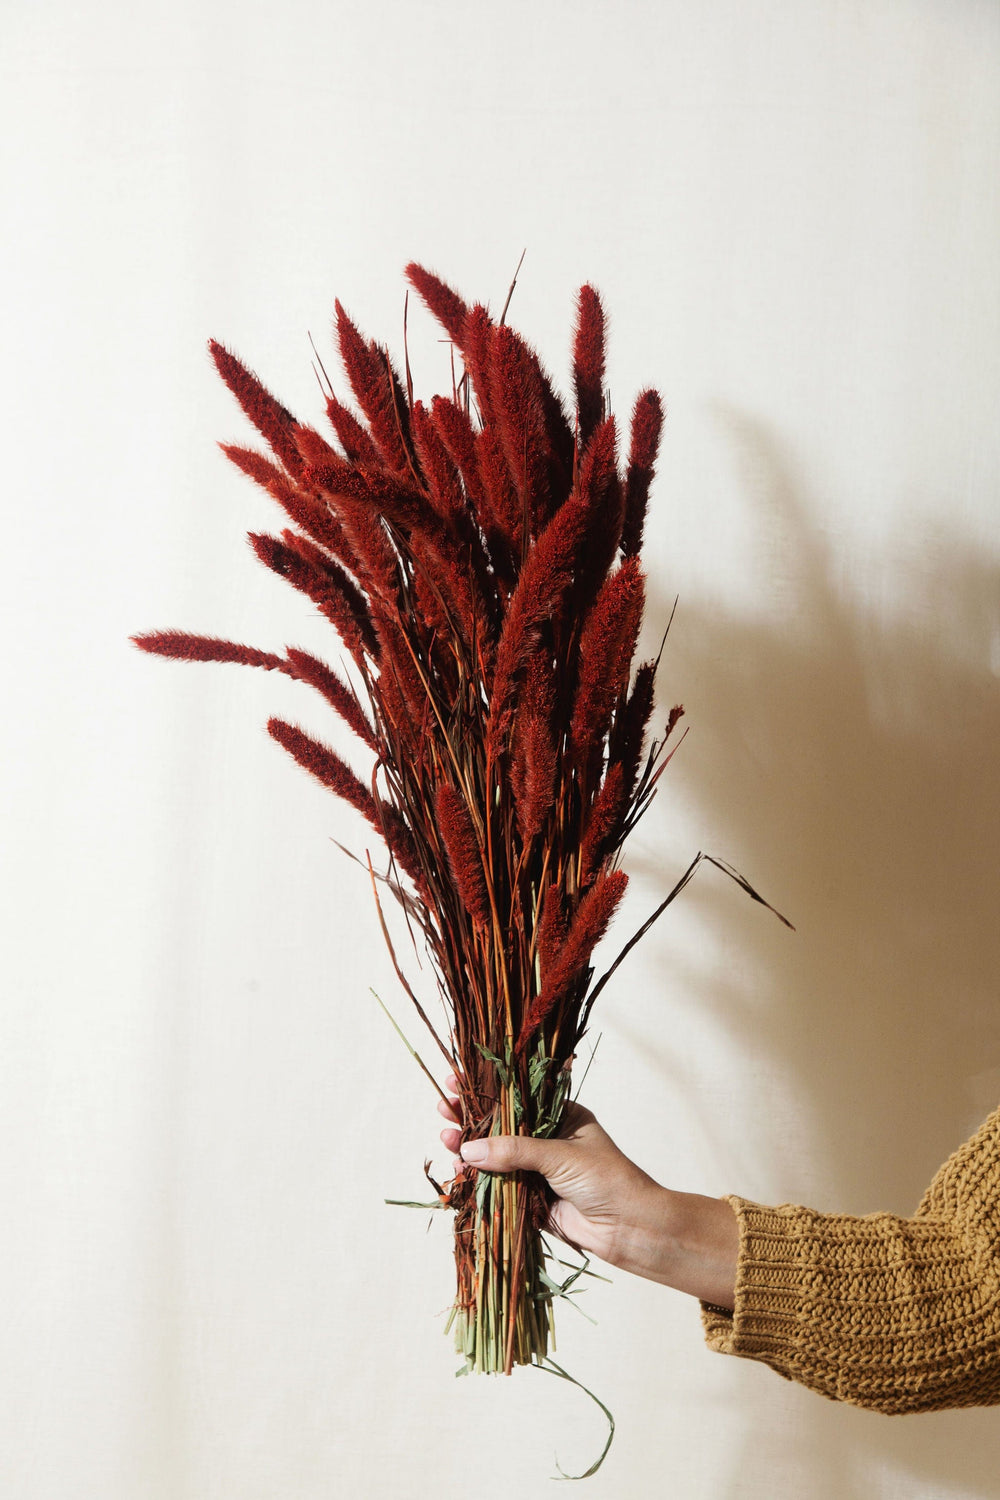 Idlewild Floral Co. Bunches Rust Red Setarea